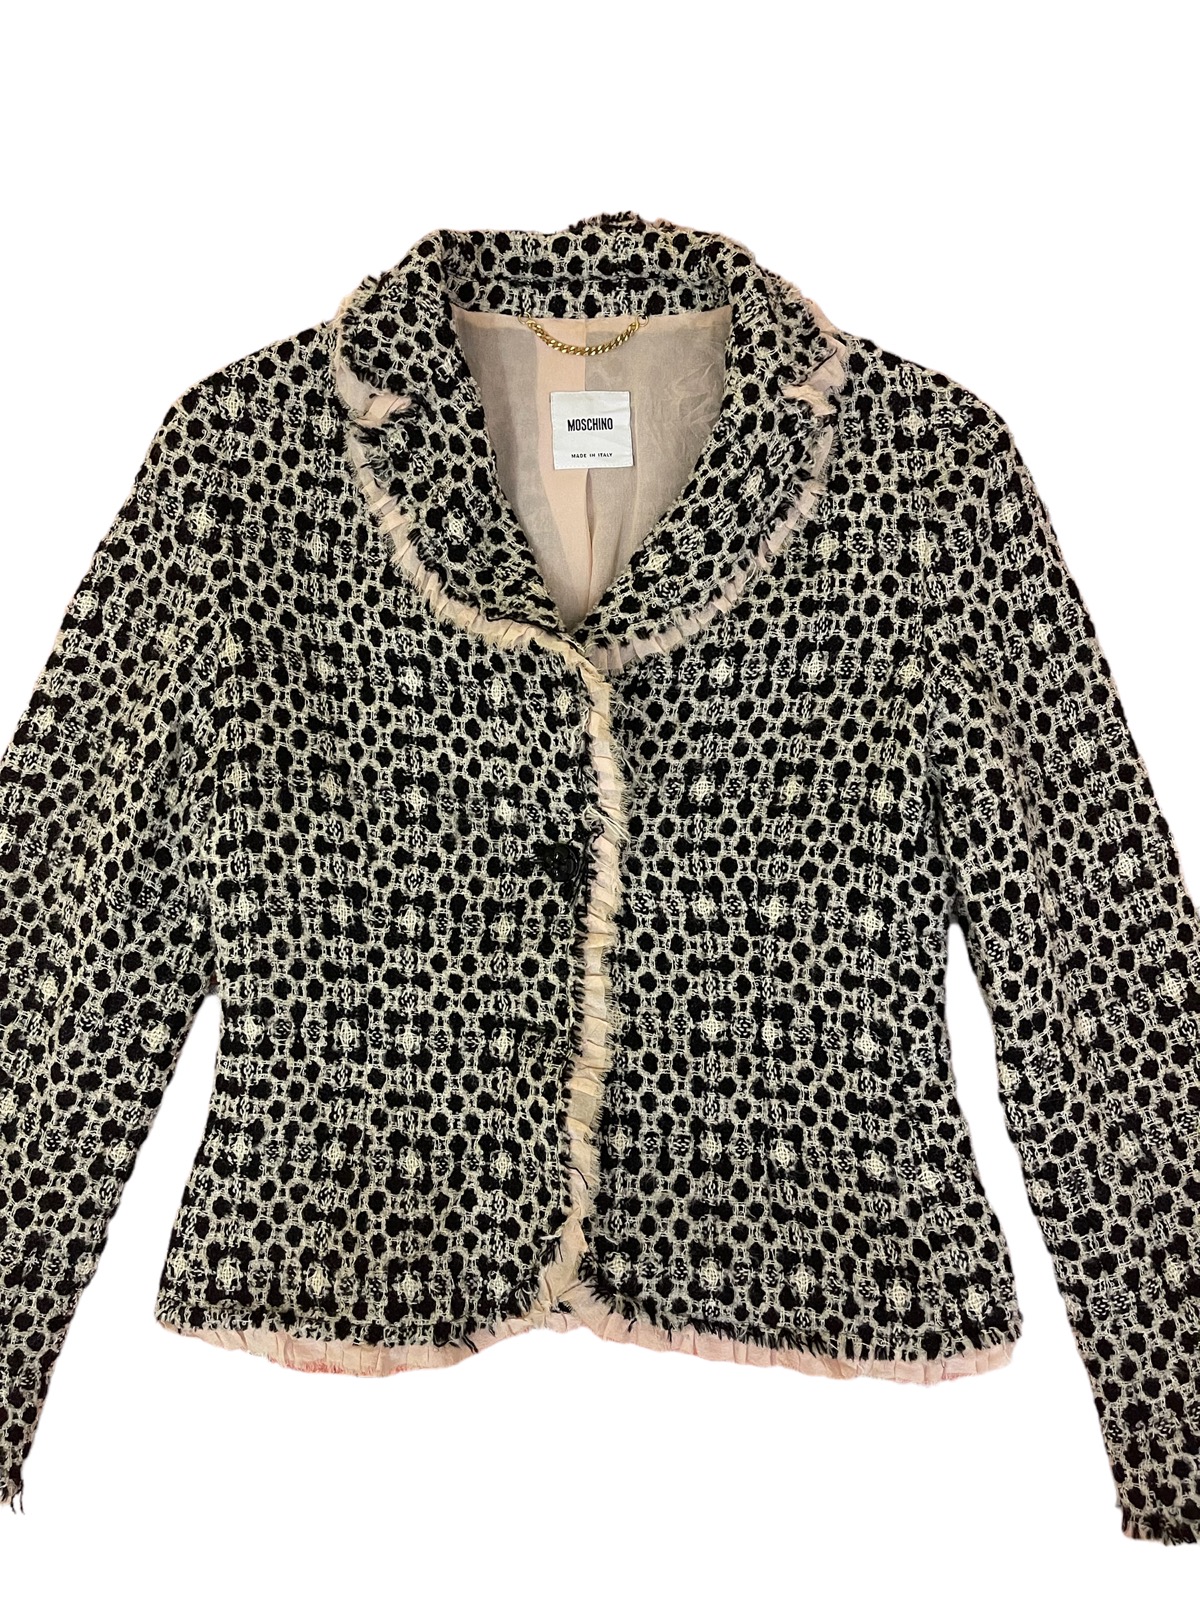 Moschino women jacket made in italy - 5